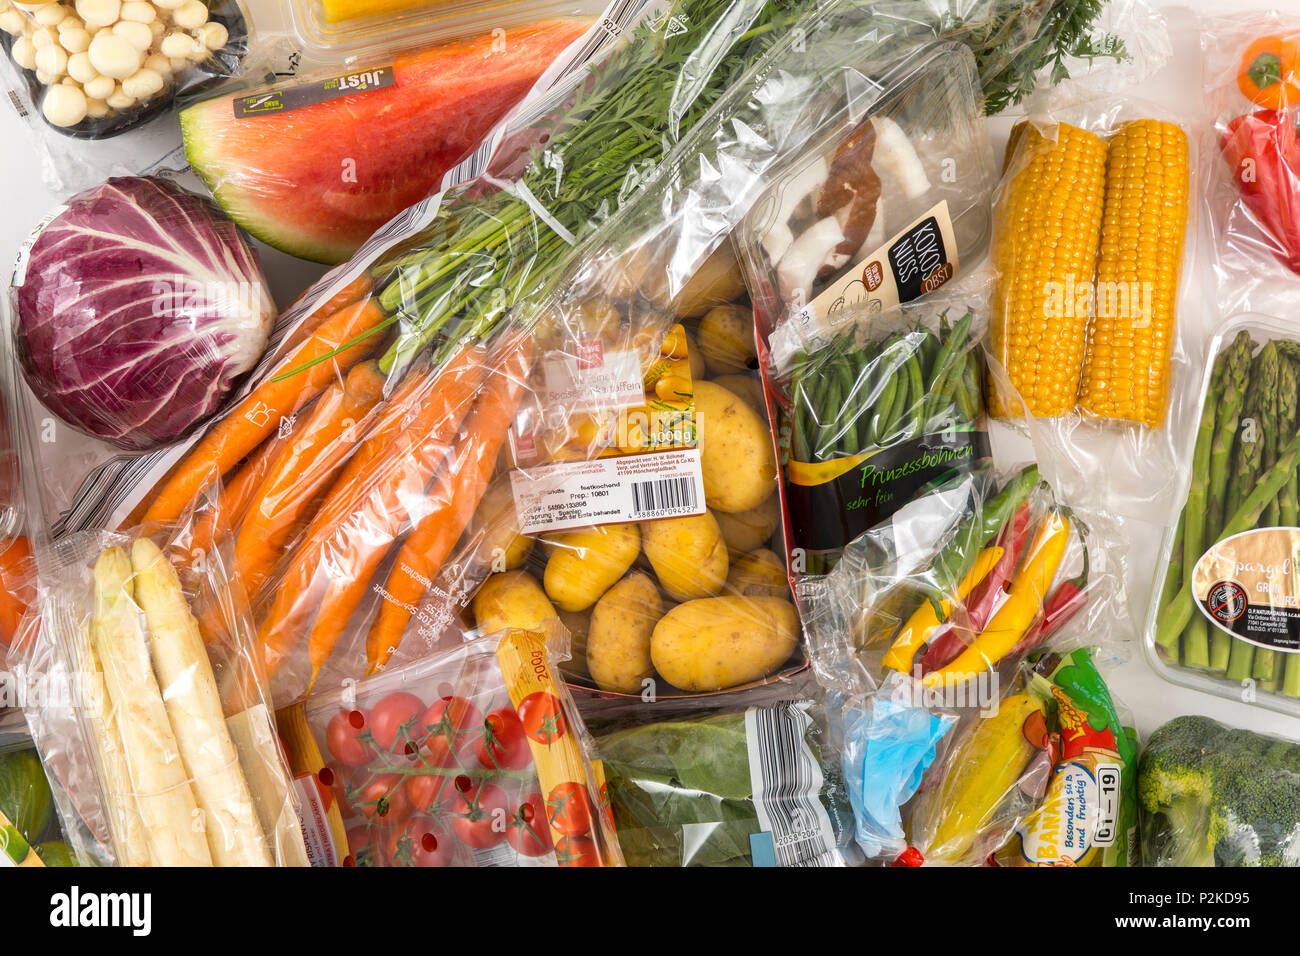 Fresh food, vegetables, fruit, each individually packaged in plastic wrap, all food is available in the same supermarket even without plastic packagin Stock Photo